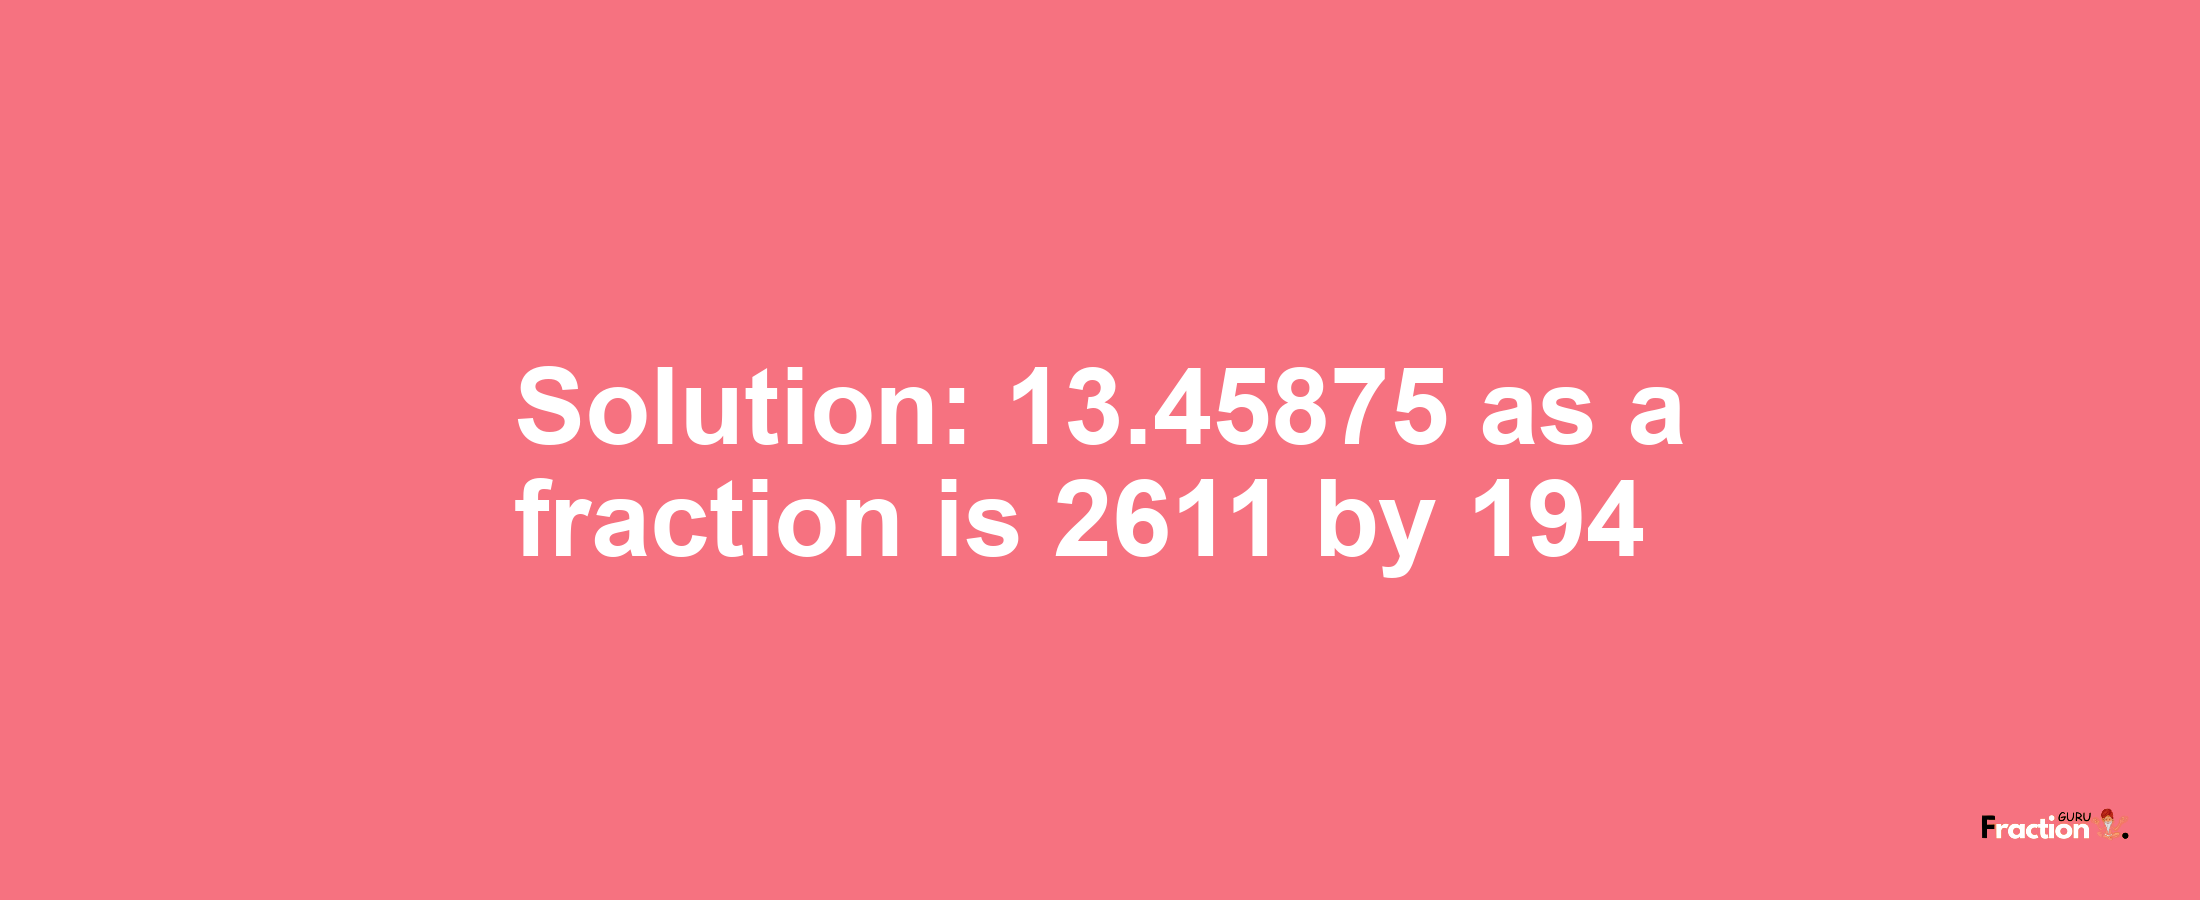 Solution:13.45875 as a fraction is 2611/194